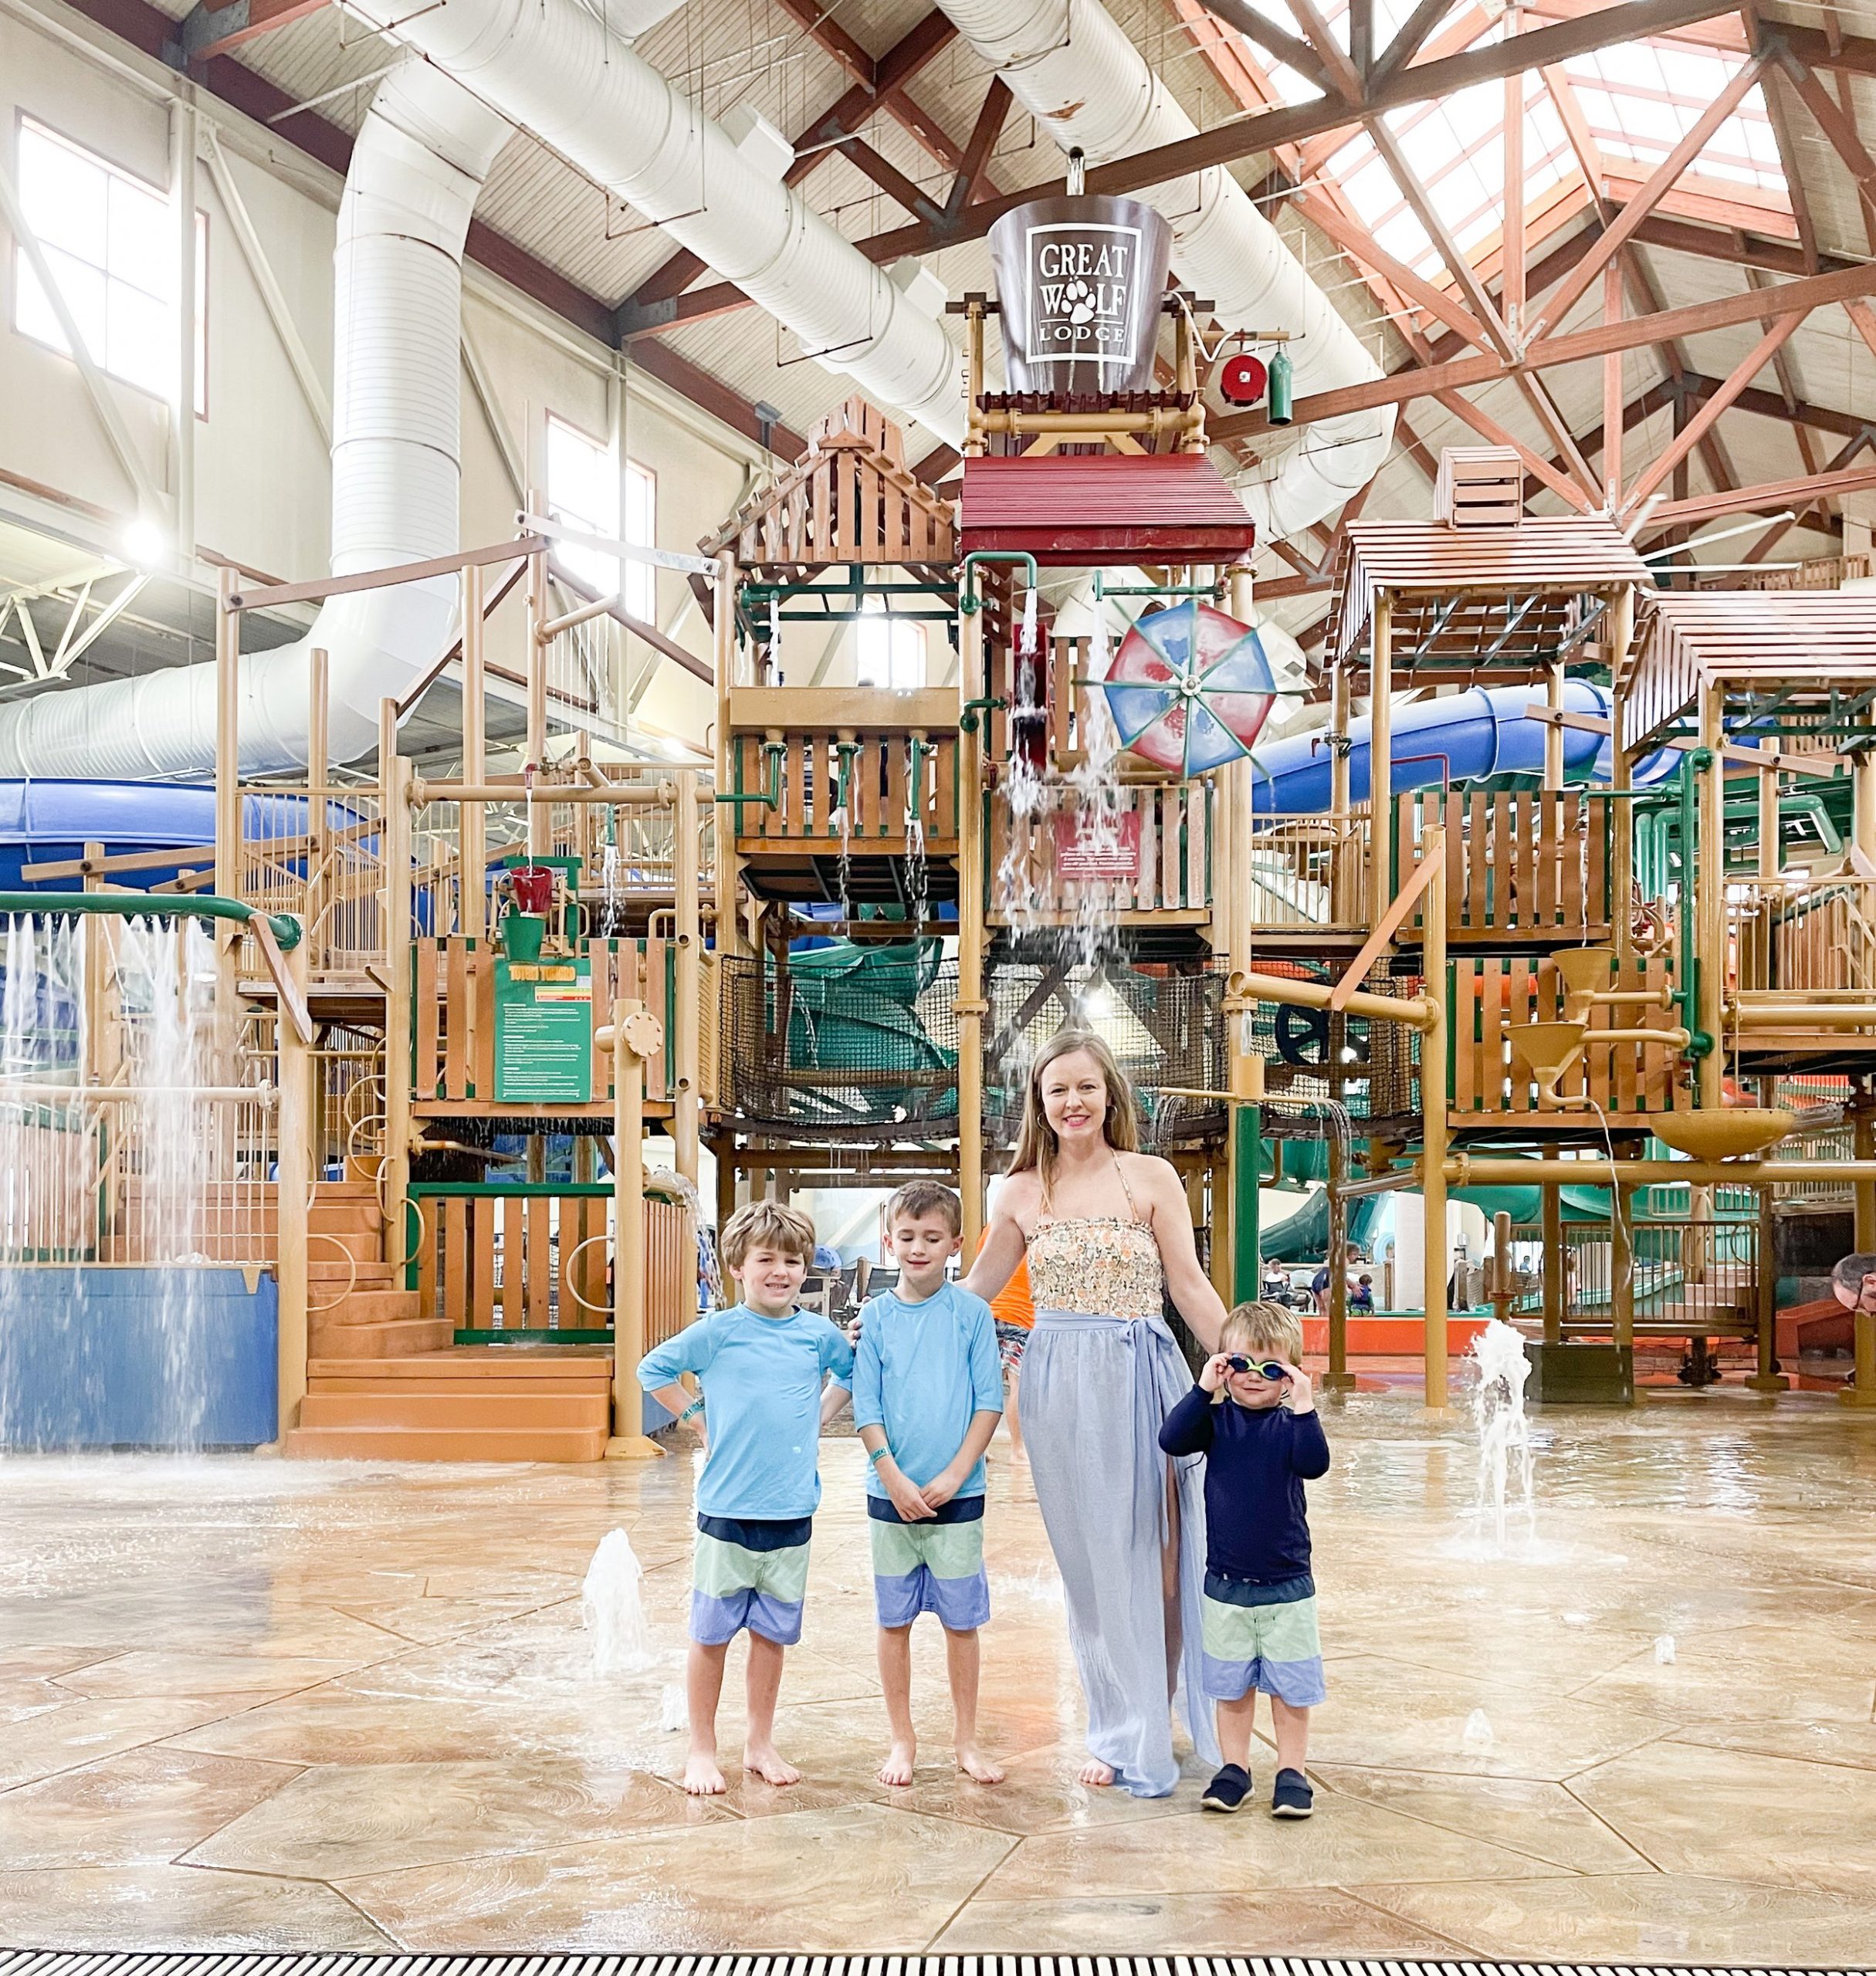 Indoor Water Park Review Great Wolf